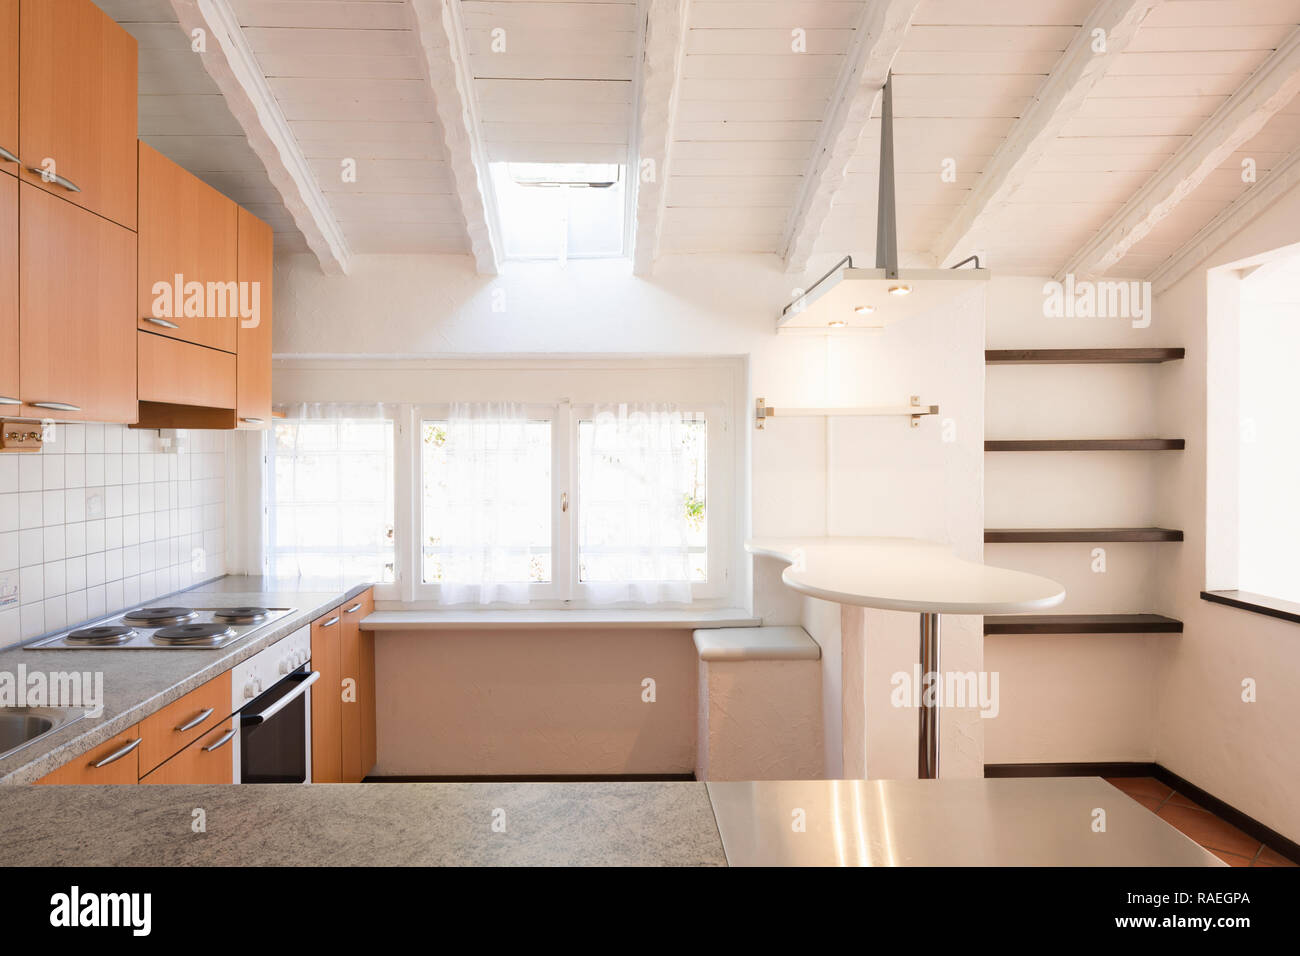 Front view of vintage kitchen with wooden furniture. On the ceiling white wooden beams Stock Photo